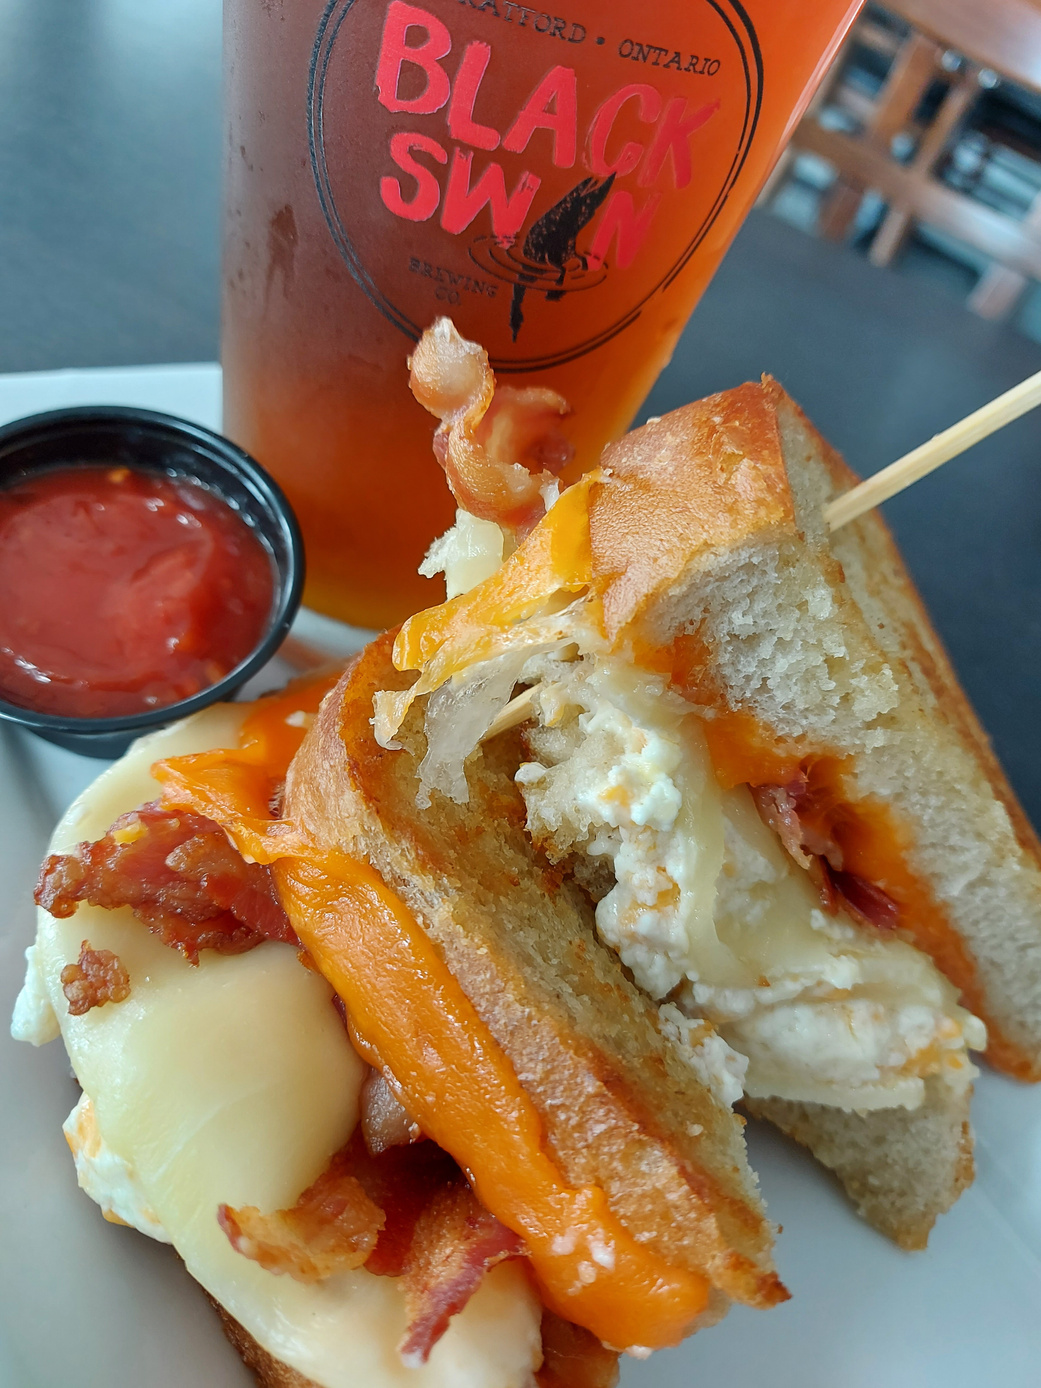 53 North Ultimate grilled cheese. Available in the 53 North Restaurant and is a stop on Bacon & Ale Trail.
Join us at 53 North Stratford Restaurant!